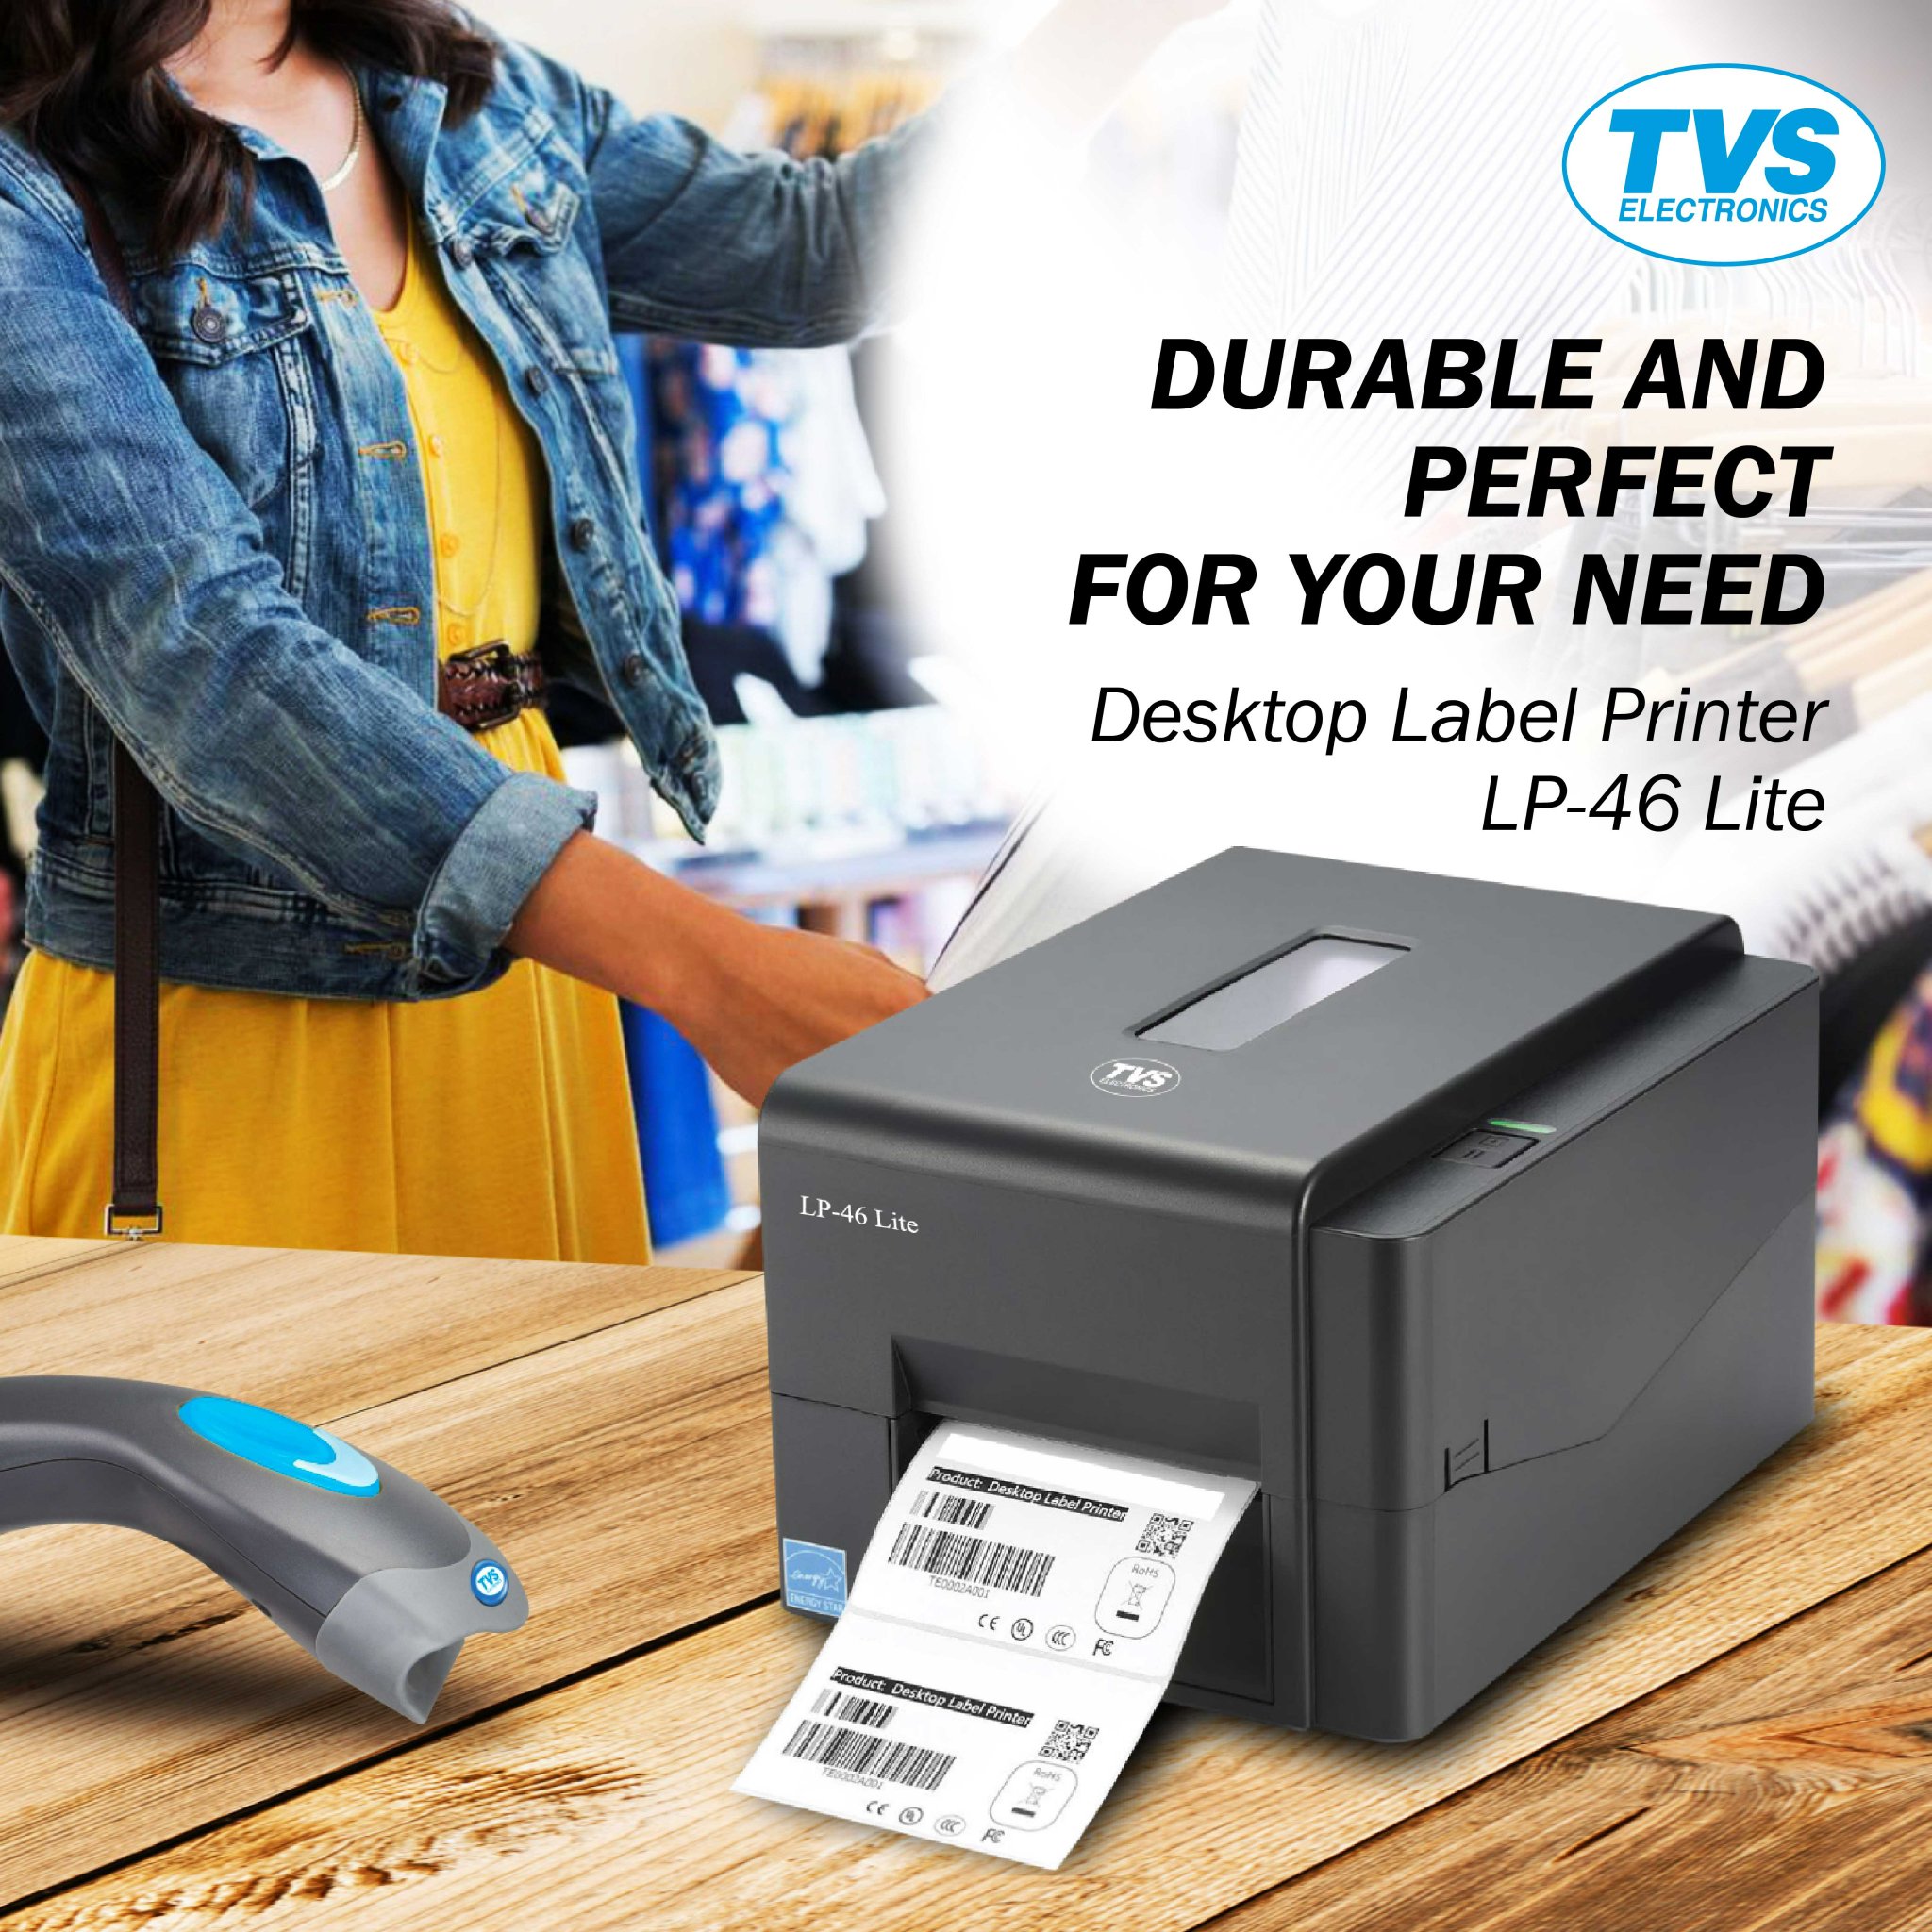 TVS Electronics on Twitter: "Durable Perfect for your need. LP 46 Lite label printer that delivers best-in-class performance while printing high-quality labels. It's ideal for manufacturing and warehousing, shipping, small offices,